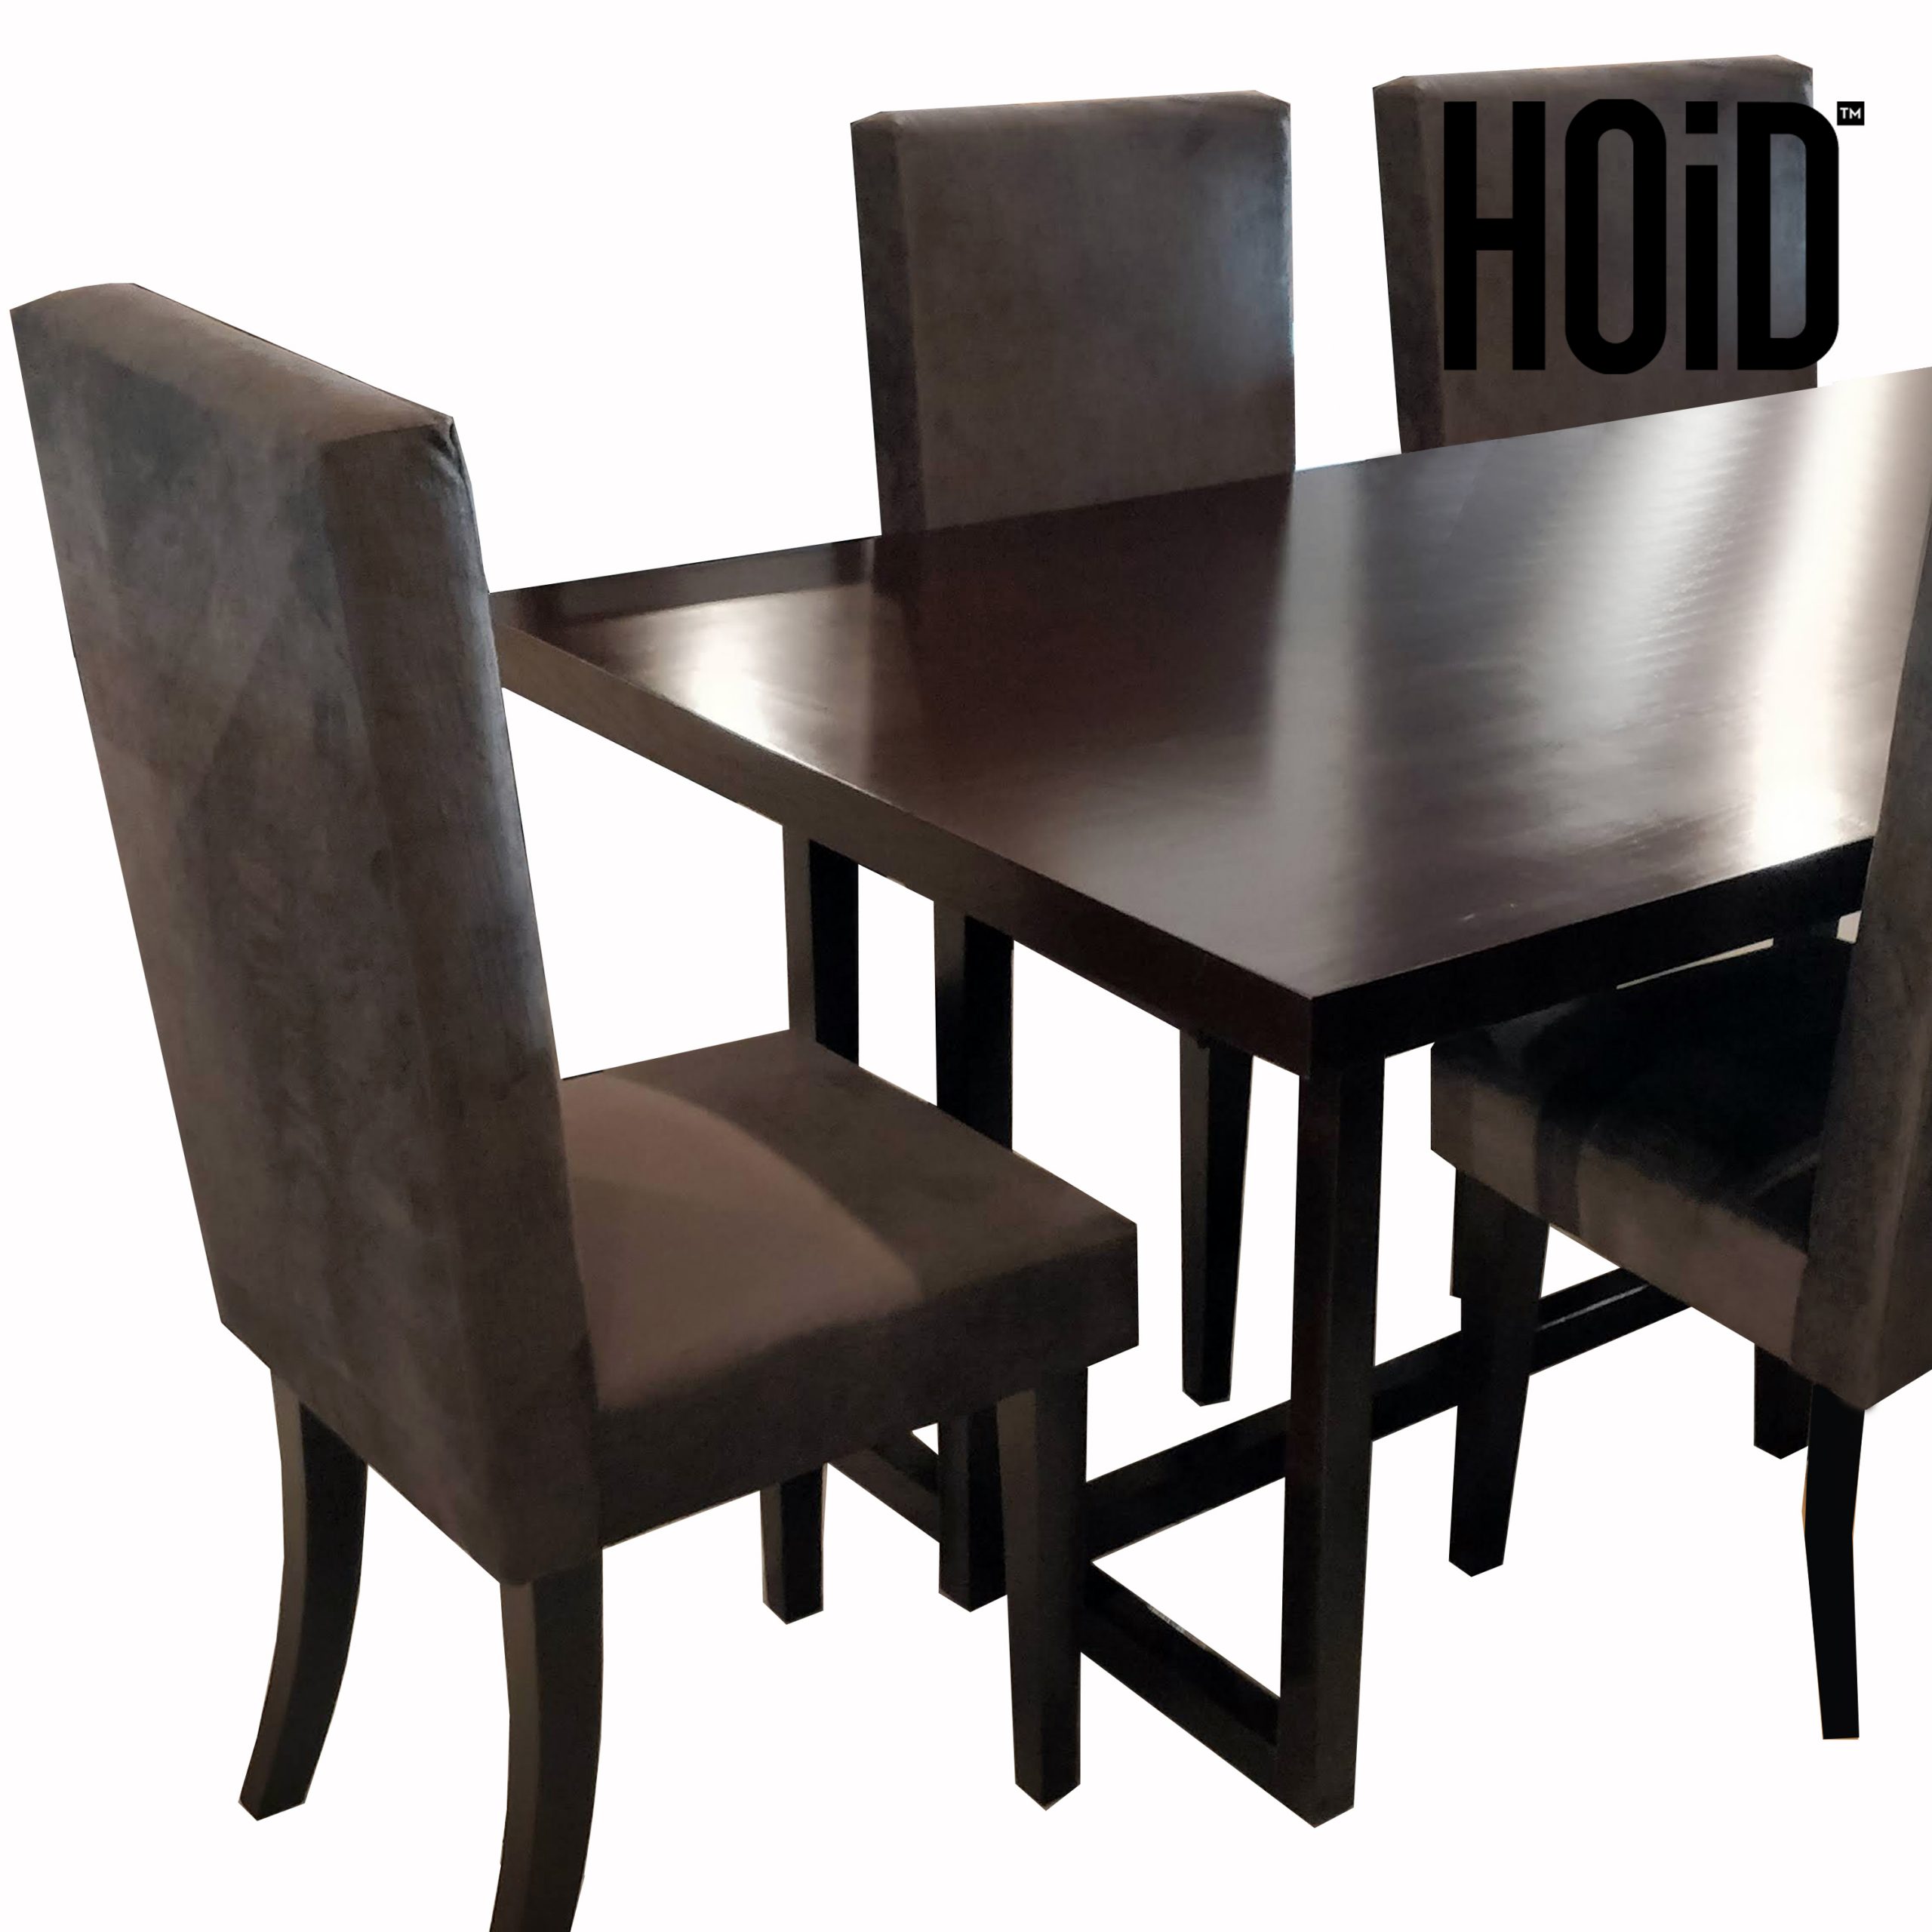 mit-dining-table-with-6-chairs-scaled-2.jpg